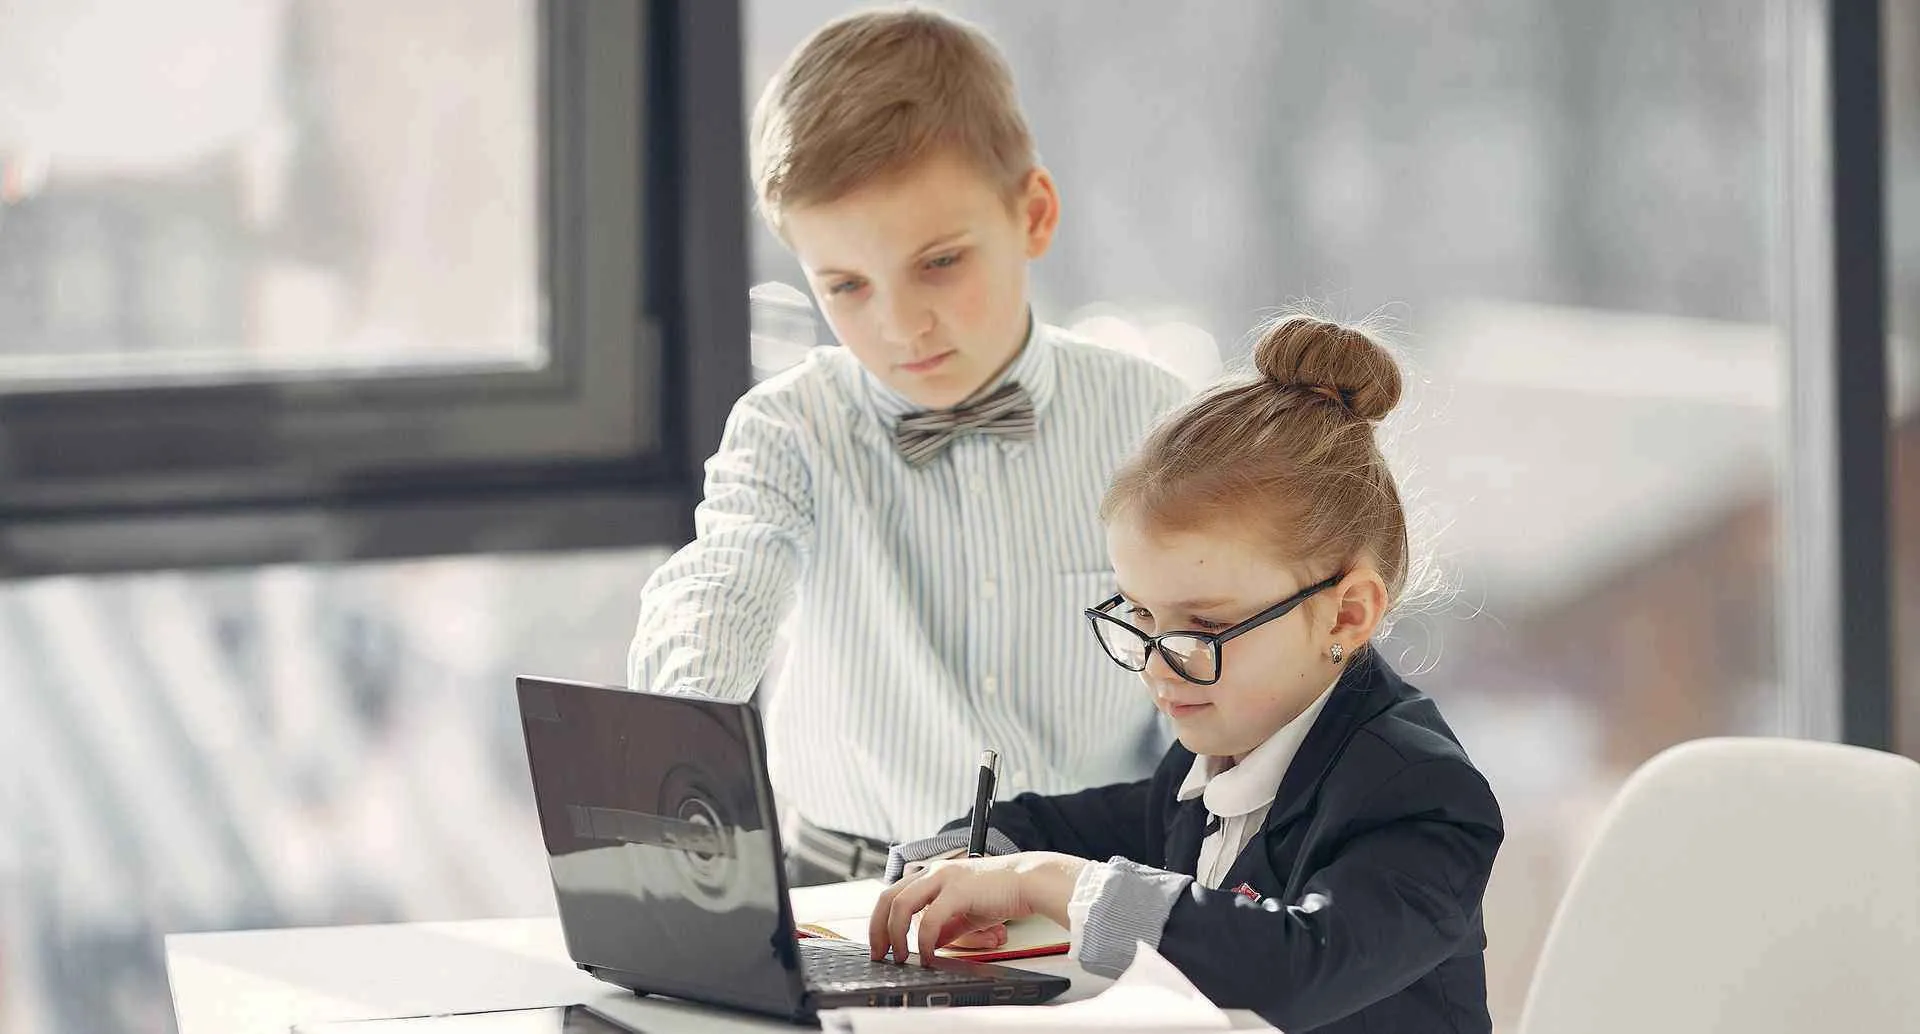 Two children dressed like executives working at a desk